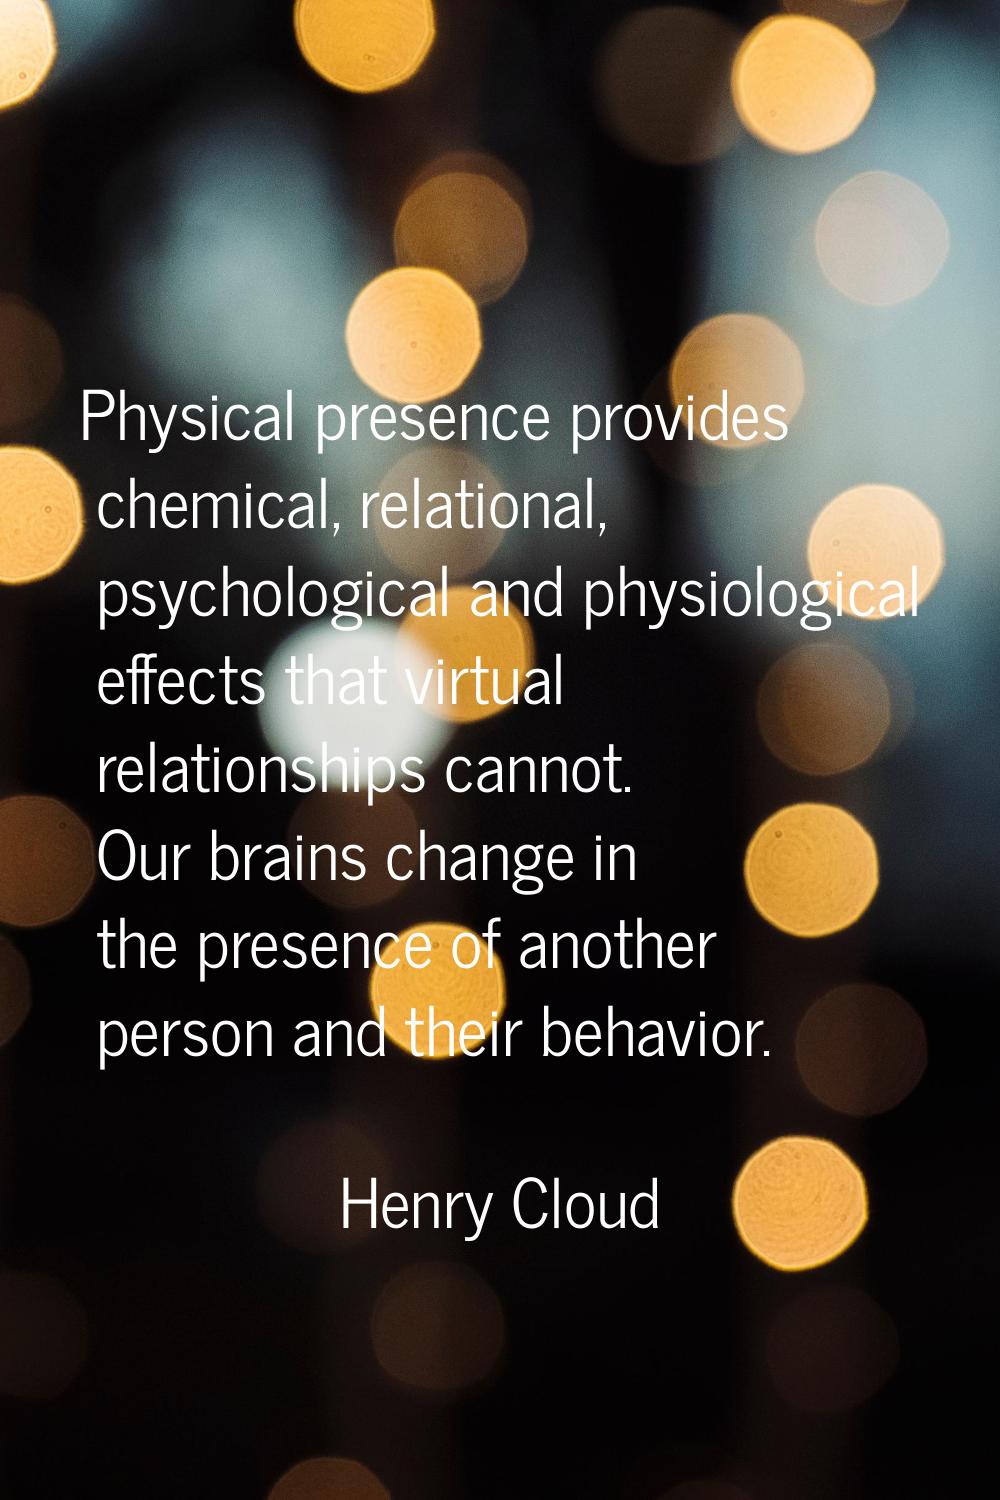 Physical presence provides chemical, relational, psychological and physiological effects that virtu